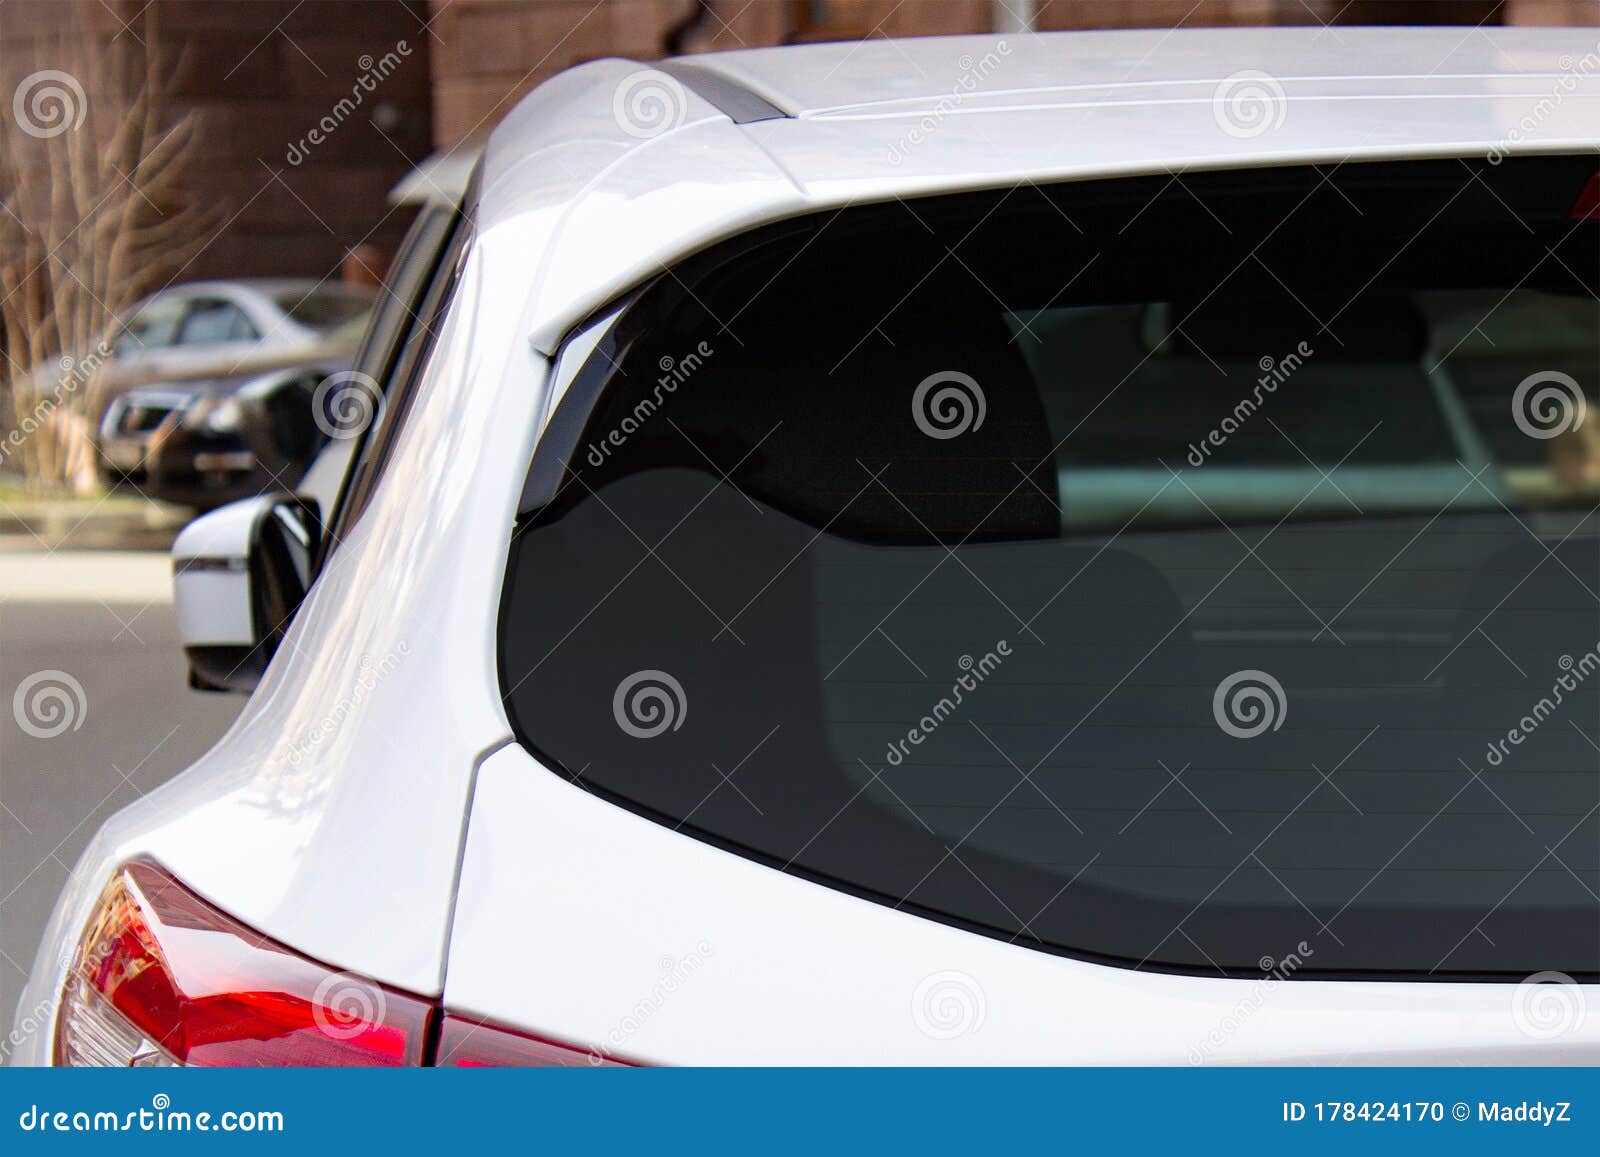 back window of a white car parked on the street, rear view. mock-up for sticker or decals